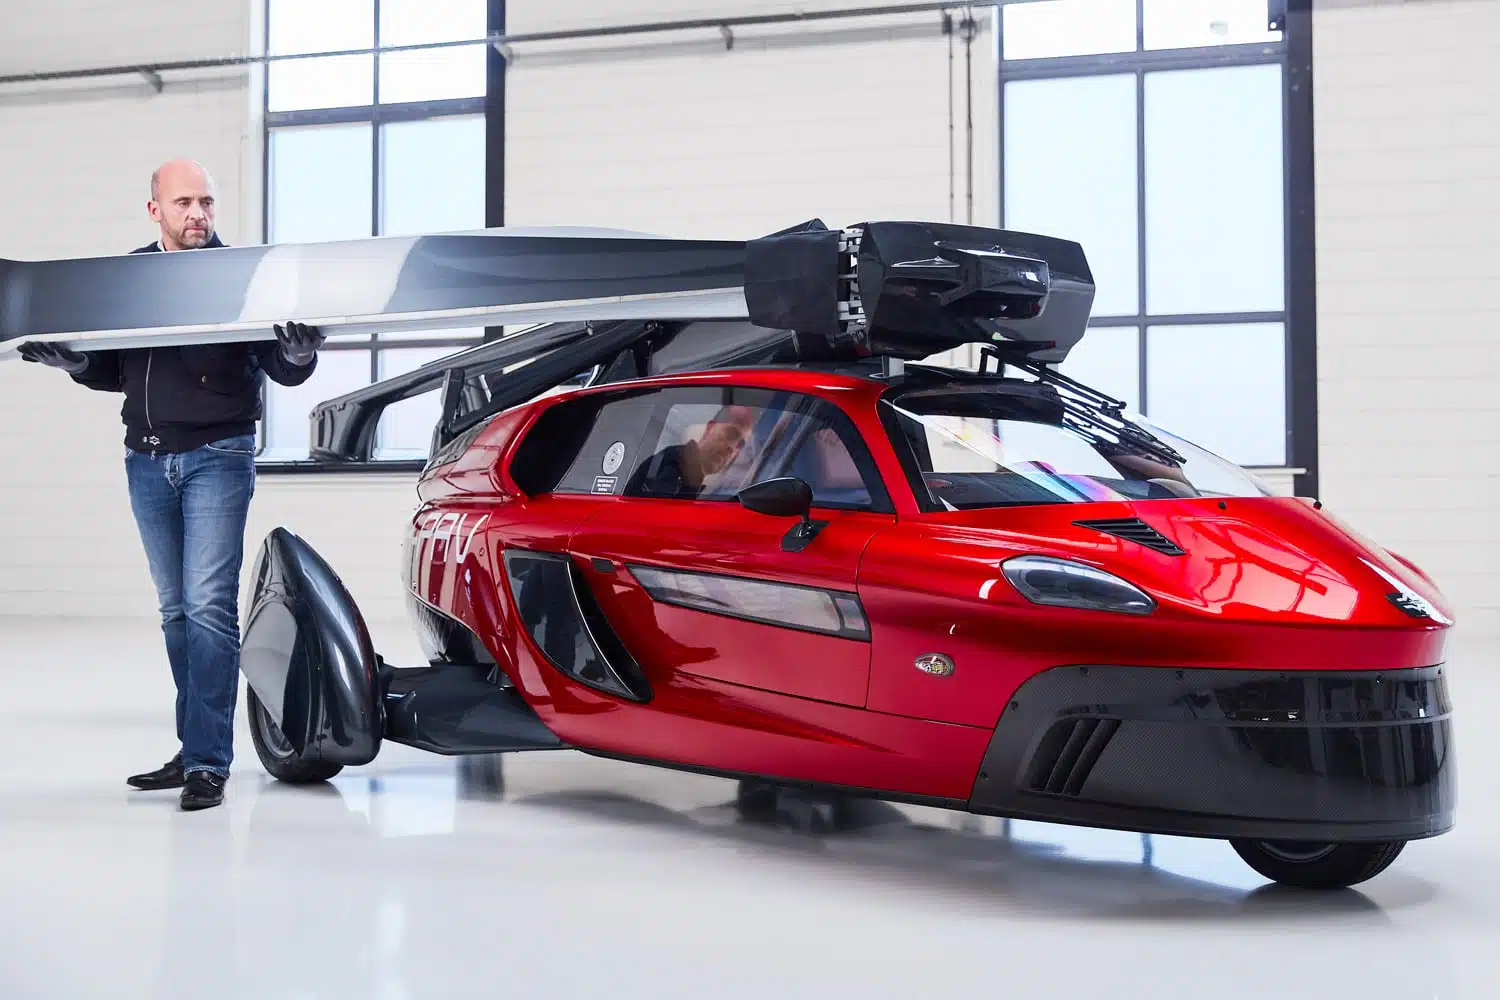 World's first car that can fly and drive both